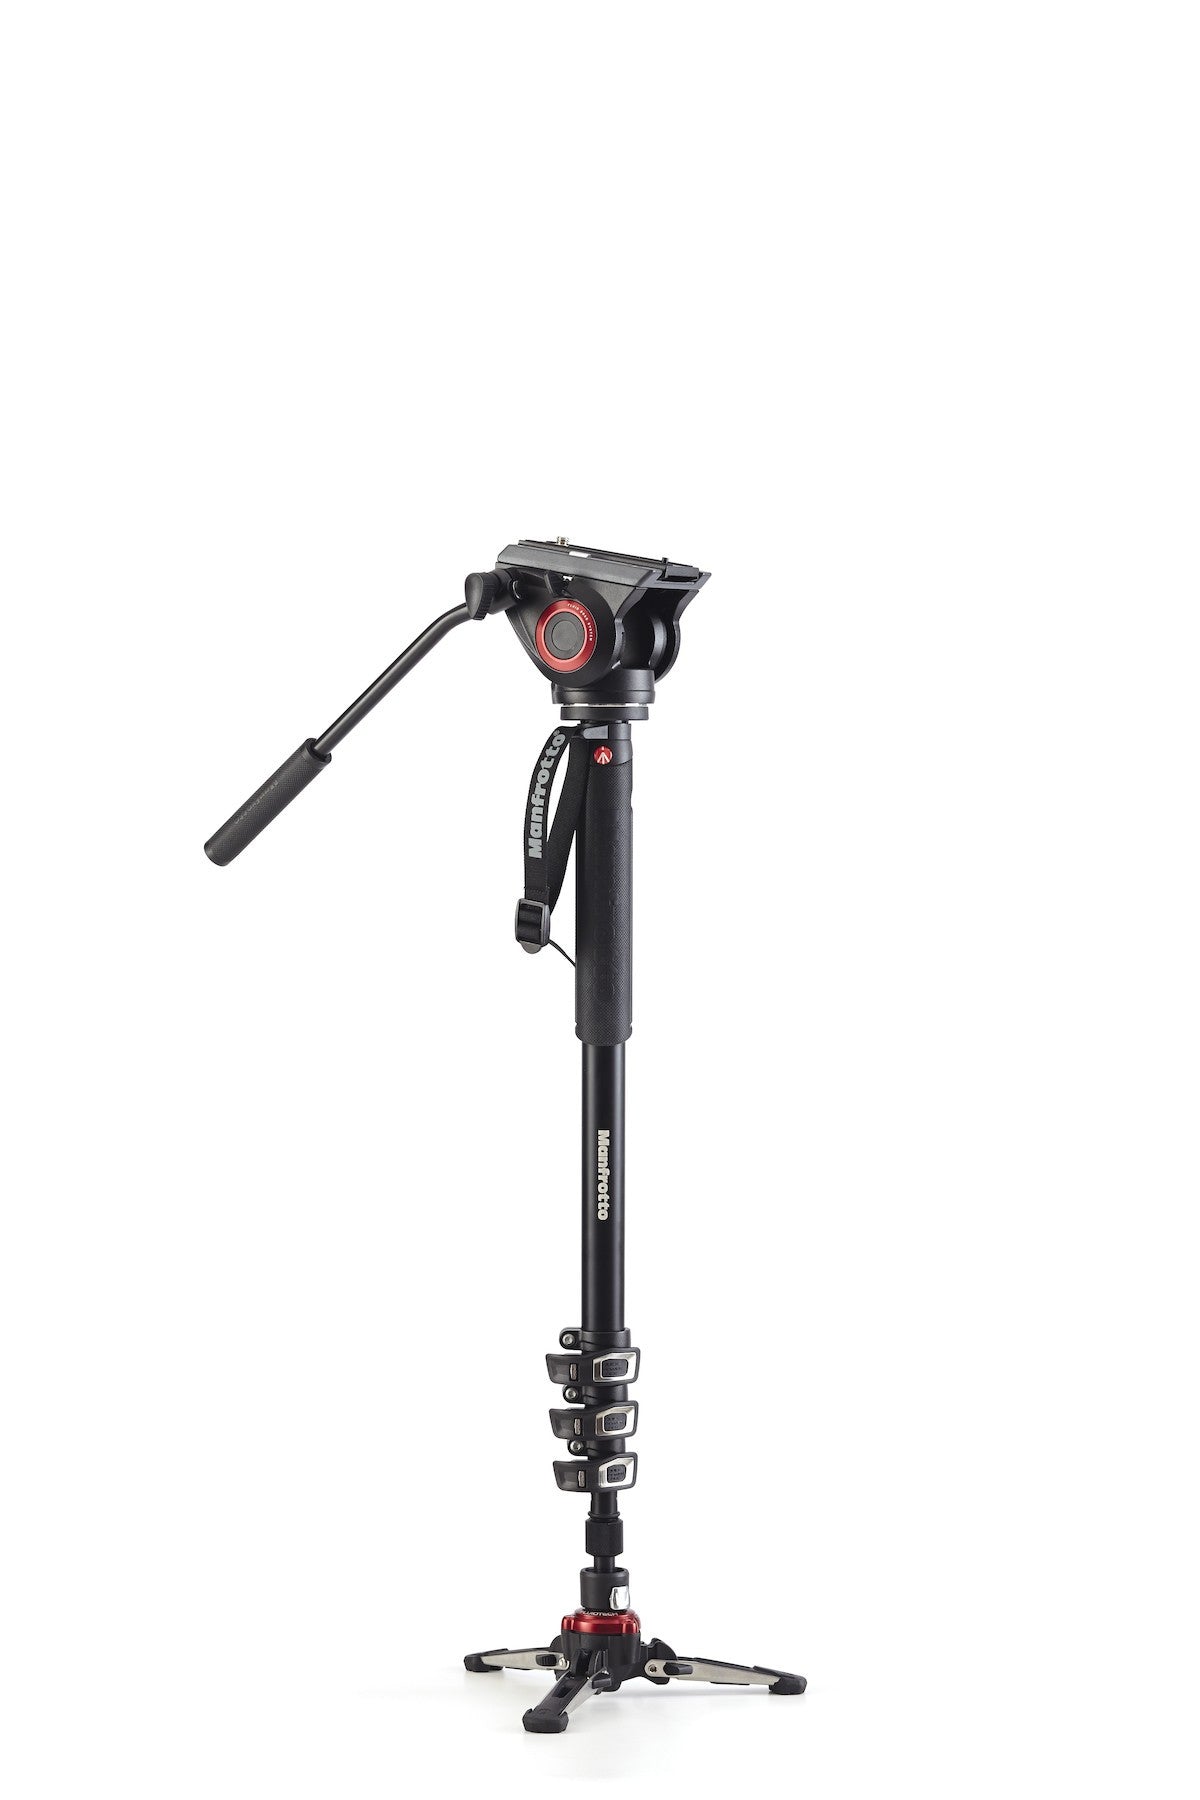 Manfrotto Video MVMXPRO500US Xpro Aluminum Video Monopod with 500 Series Video Head, tripods video monopods, Manfrotto - Pictureline  - 2